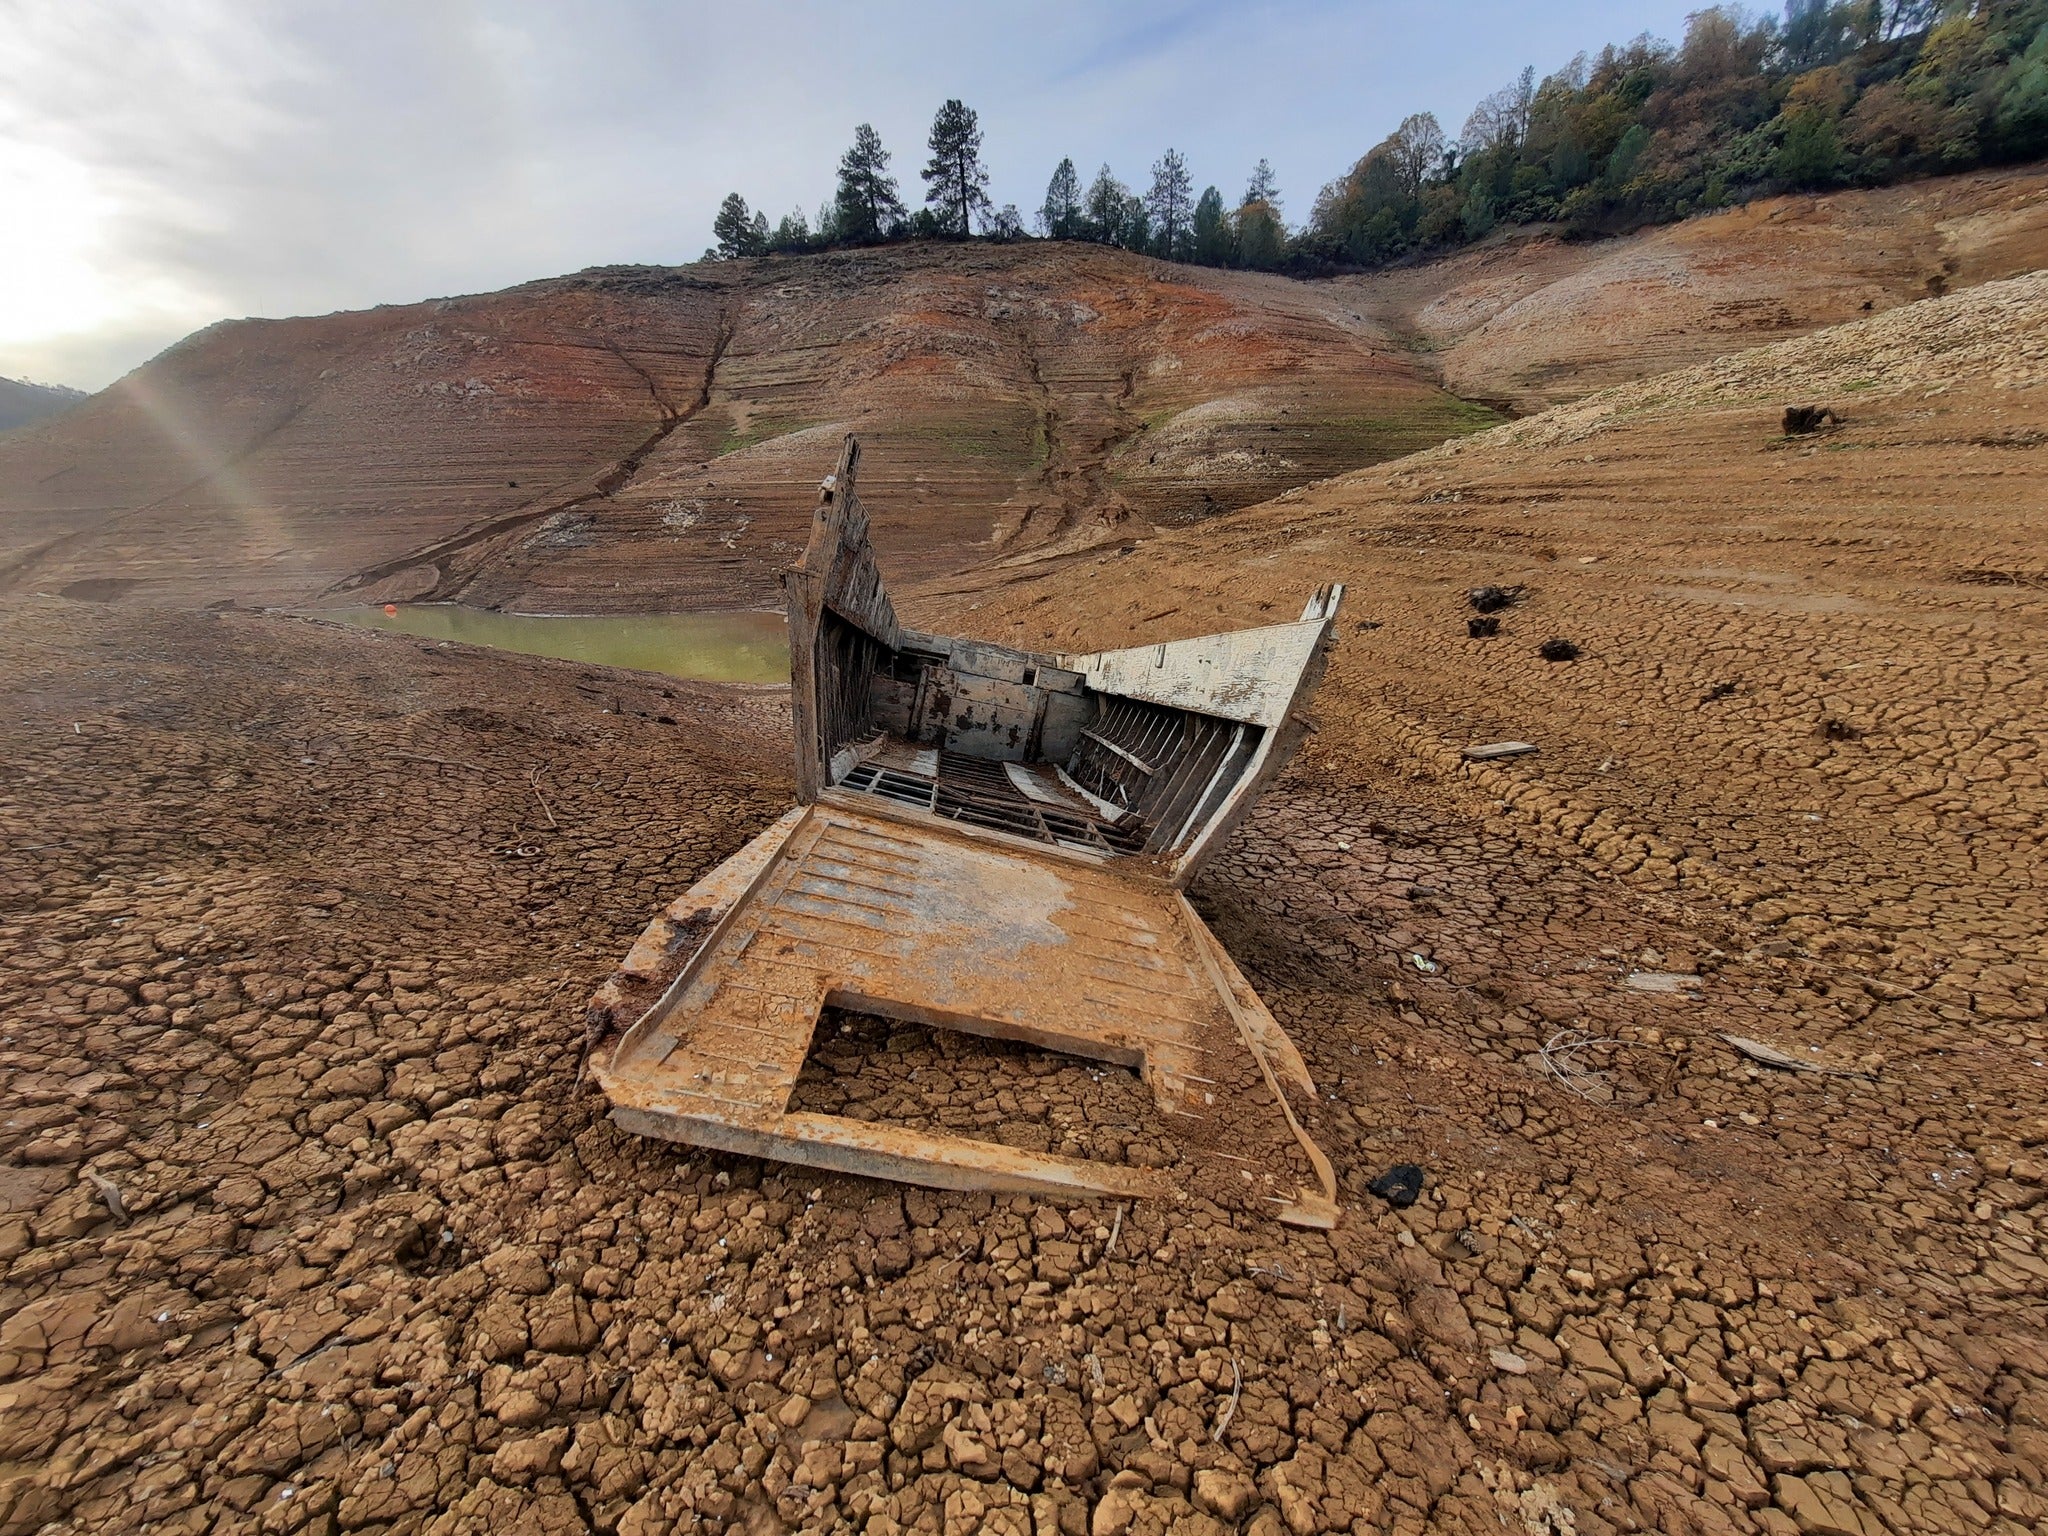 The ‘ghost boat’ found on the shoreline of Shasta Lake in northern California